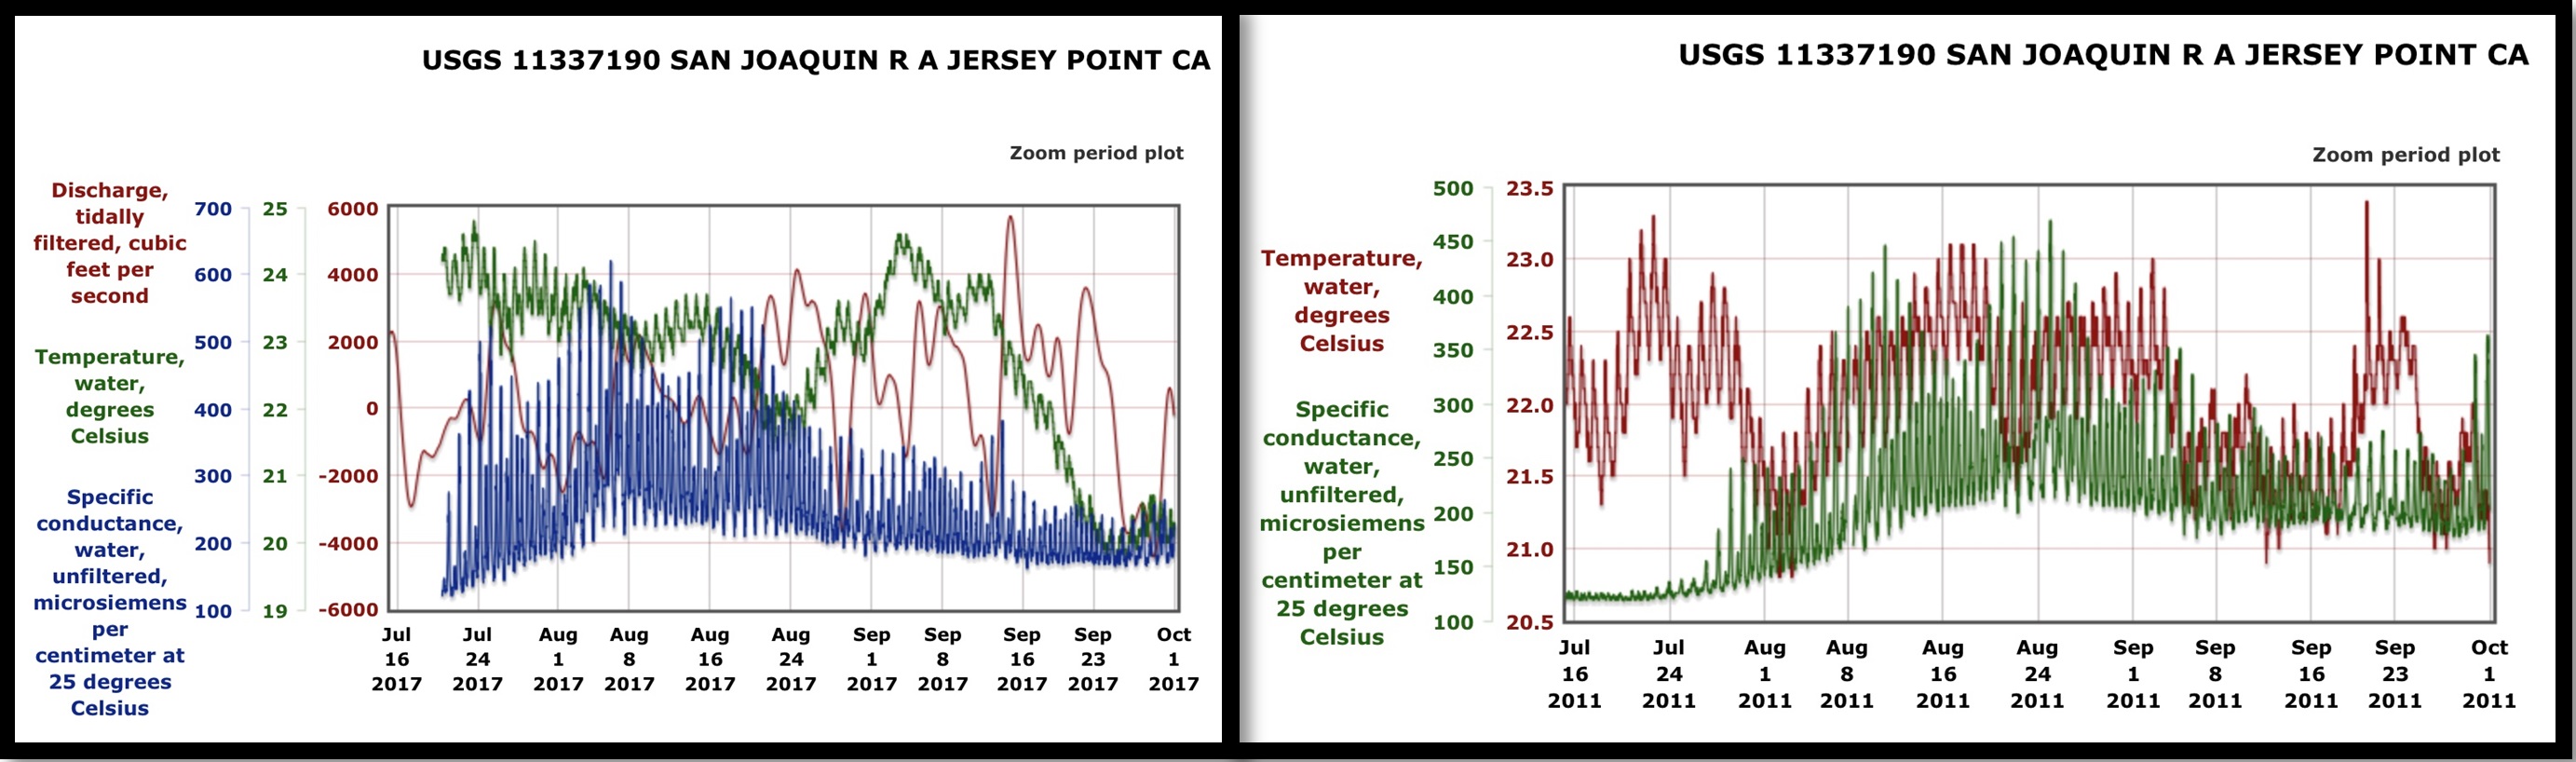 Figure 3. Comparison of Jersey Pt habitat conditions in 2017 versus 2011. Tidally filtered flow data were not available for 2011.